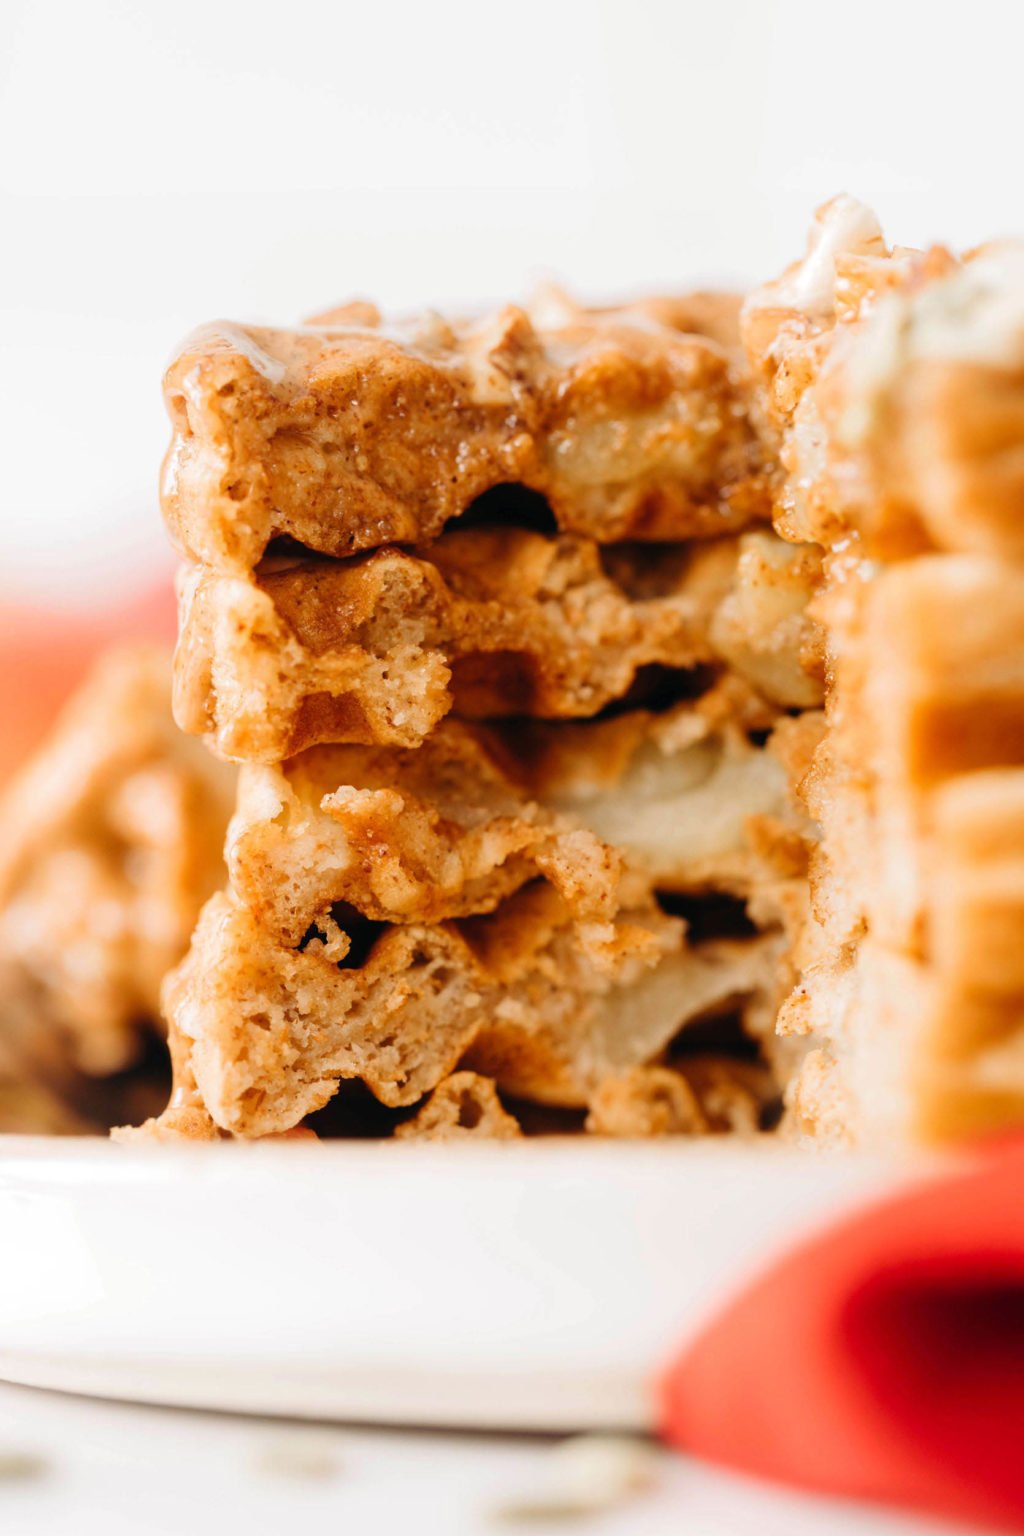 A thick, fluffy stack of vegan apple cinnamon waffles has been cut into, revealing layers of waffle and apple inside.